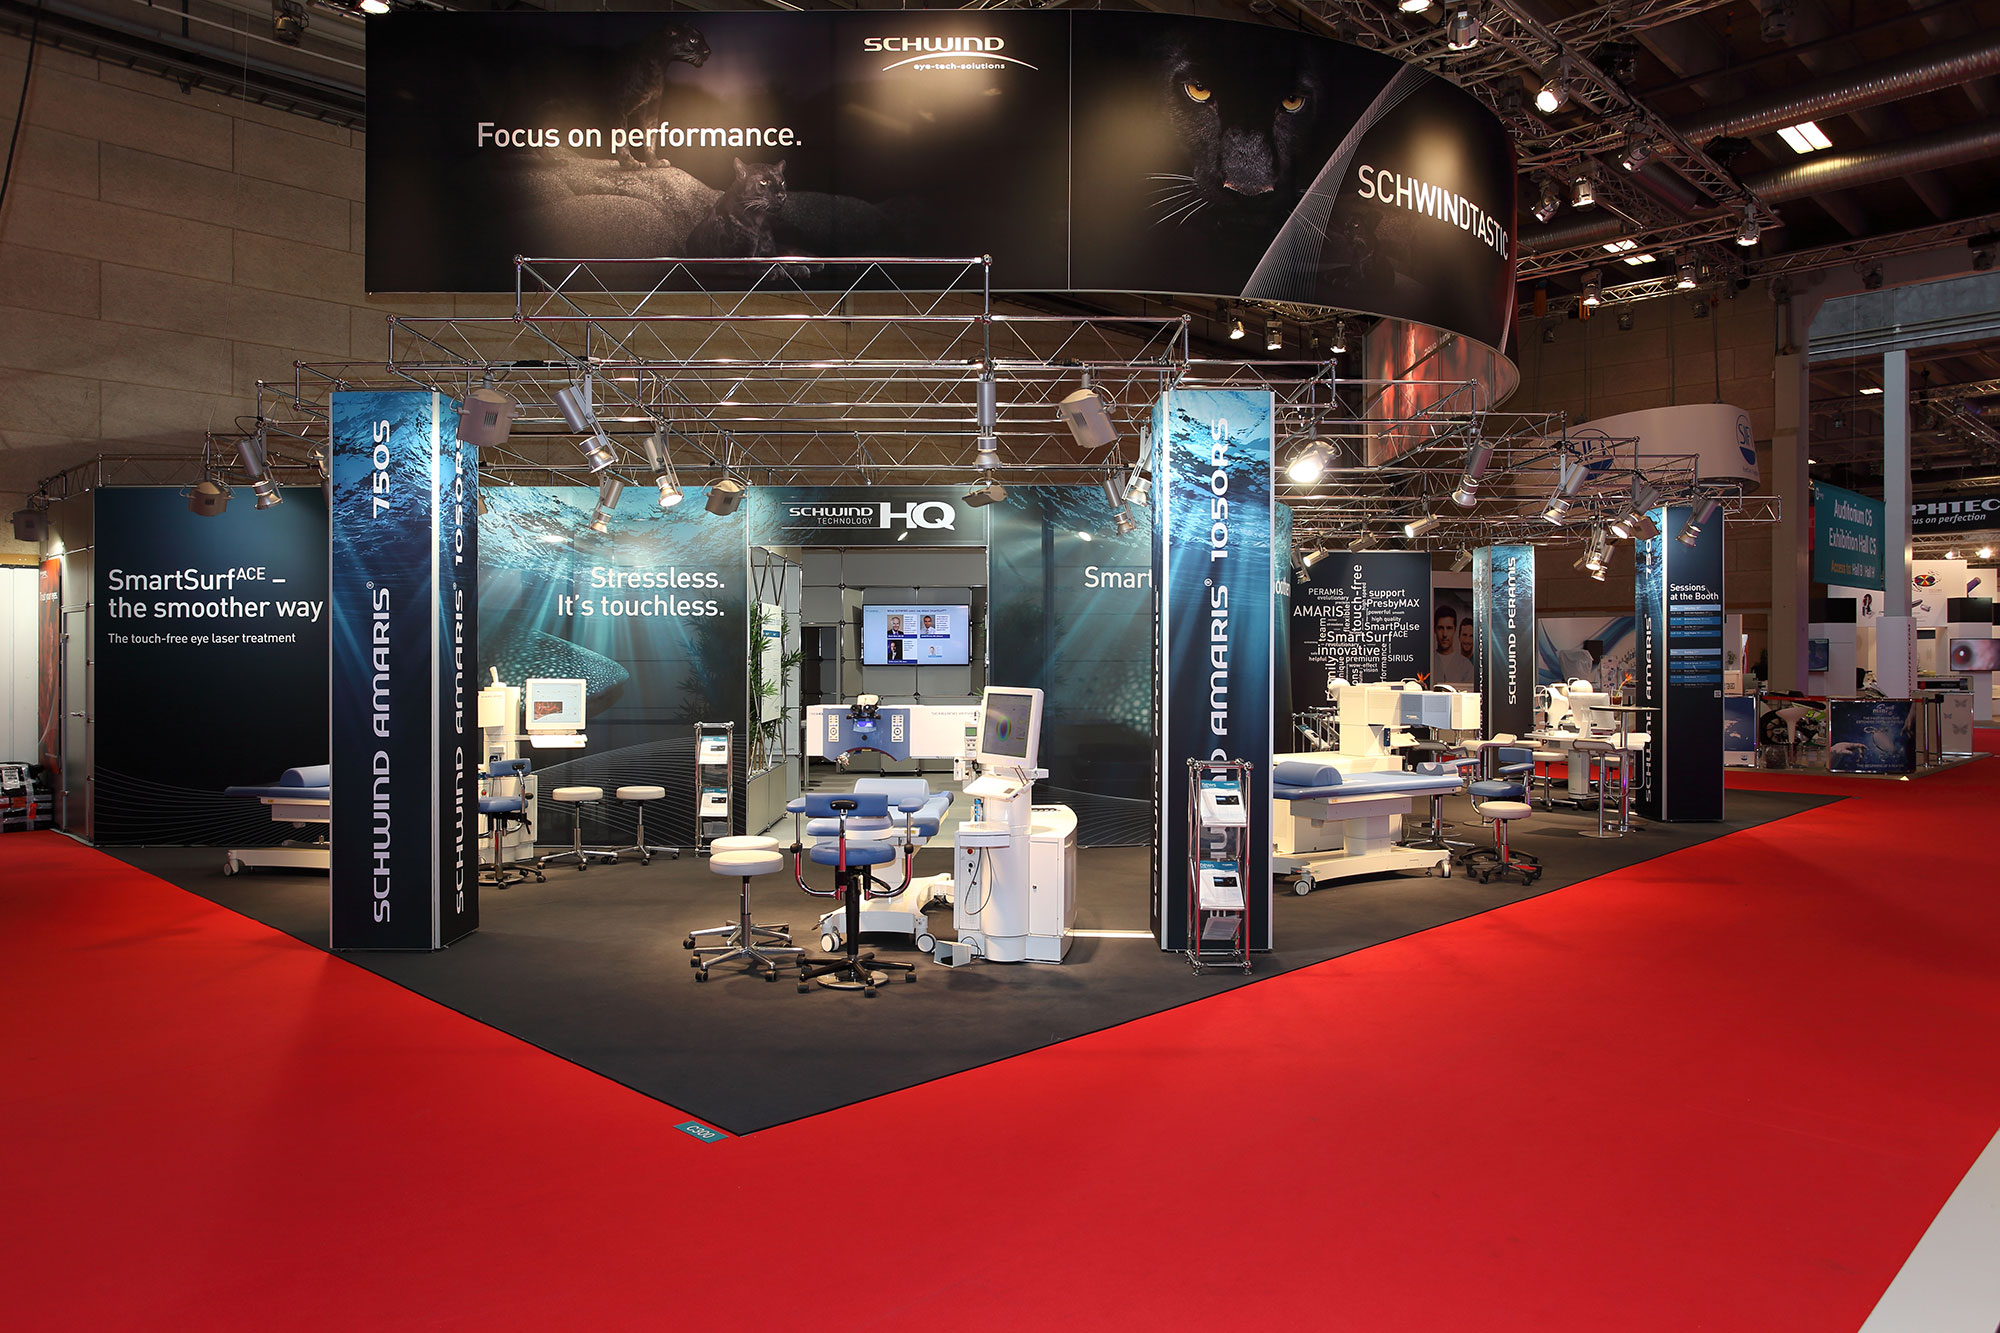 Exhibition stand of Schwind at the ESCRS 2016